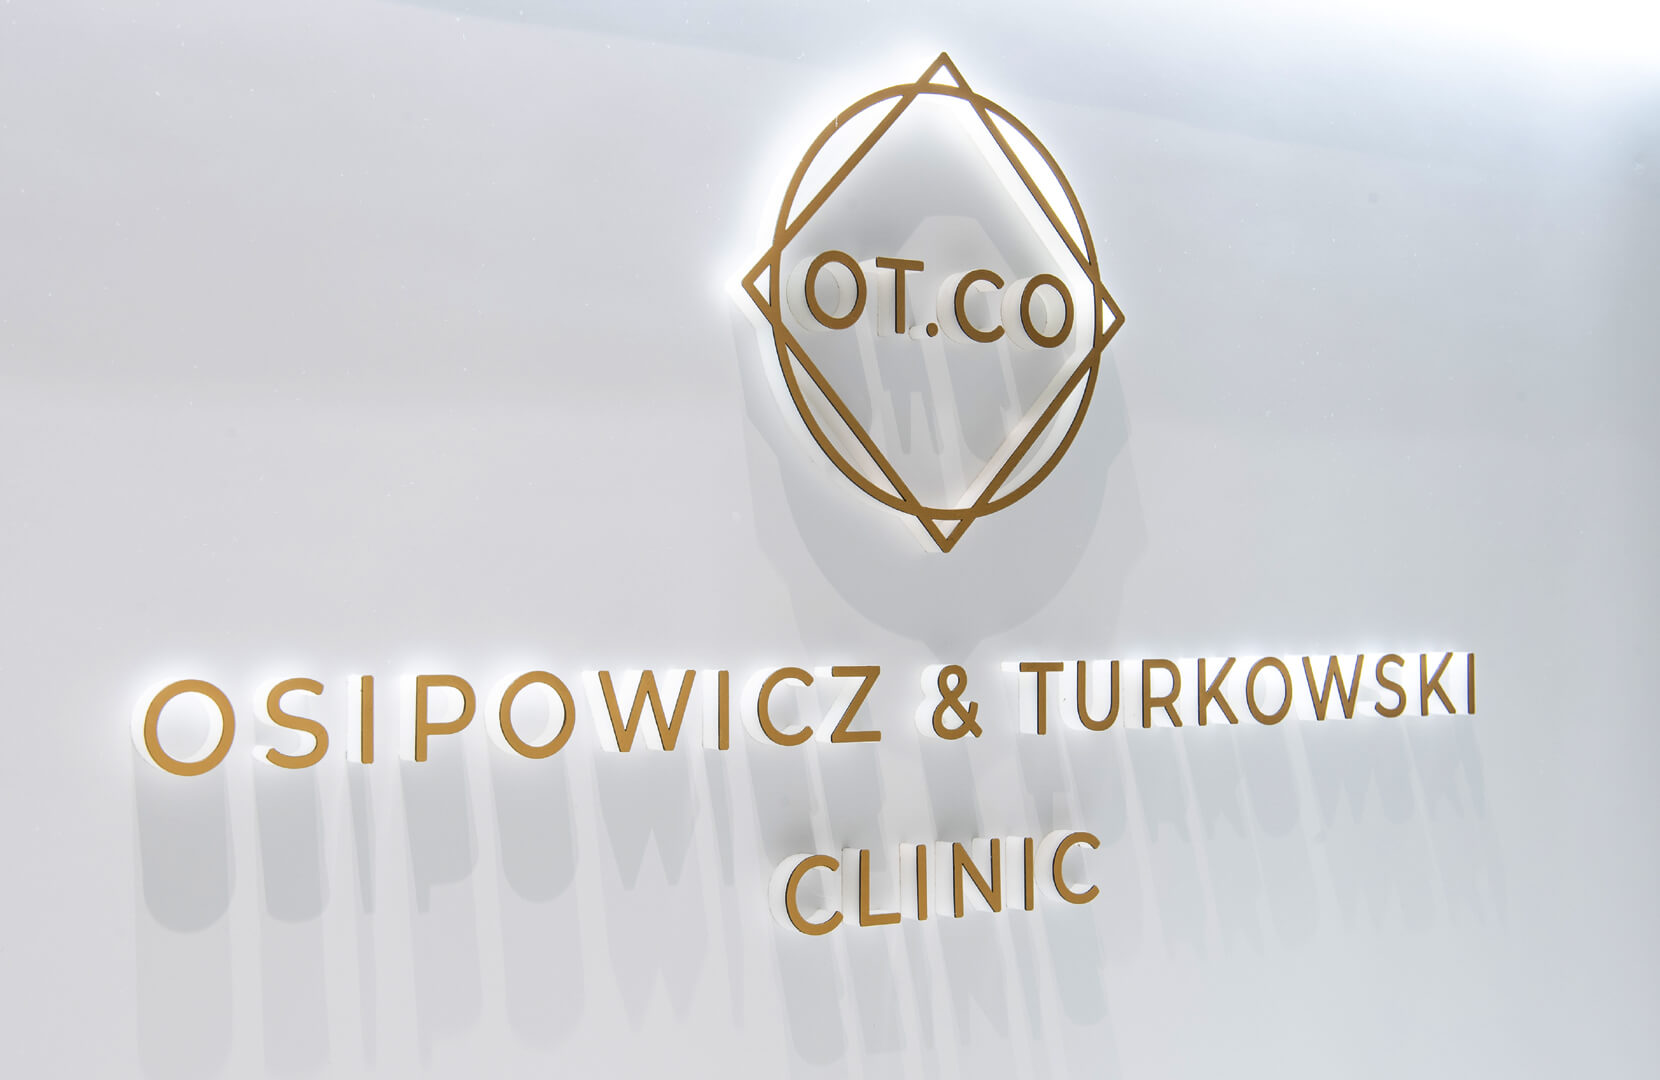 Gold spatial letters along with the logo in the reception area of OT.CO Clinic